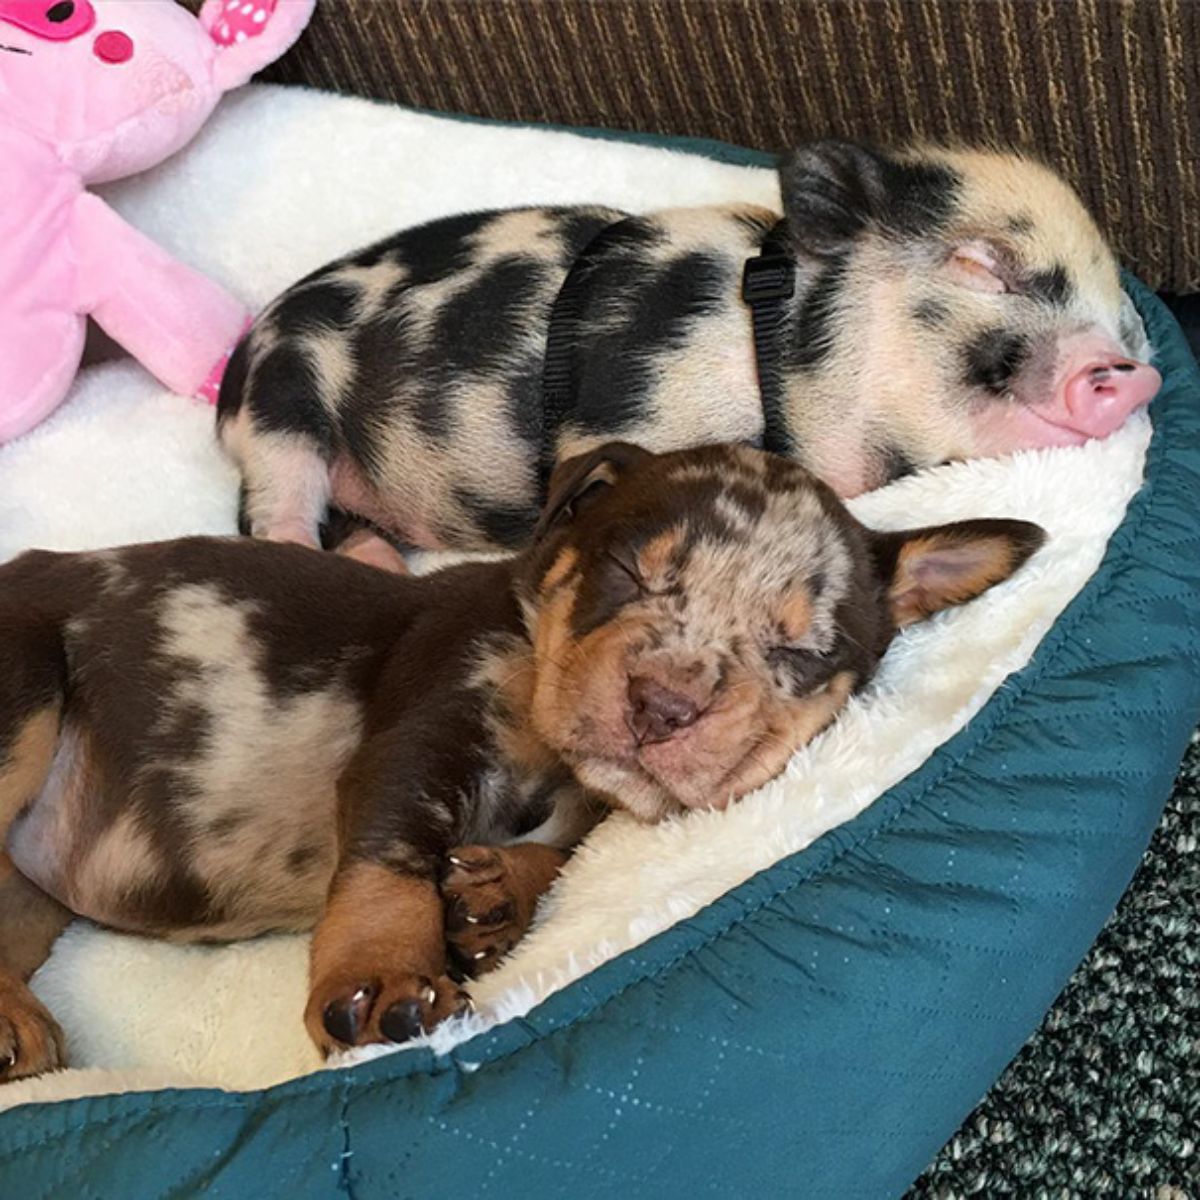 black and white puppy and piglet sleeping together